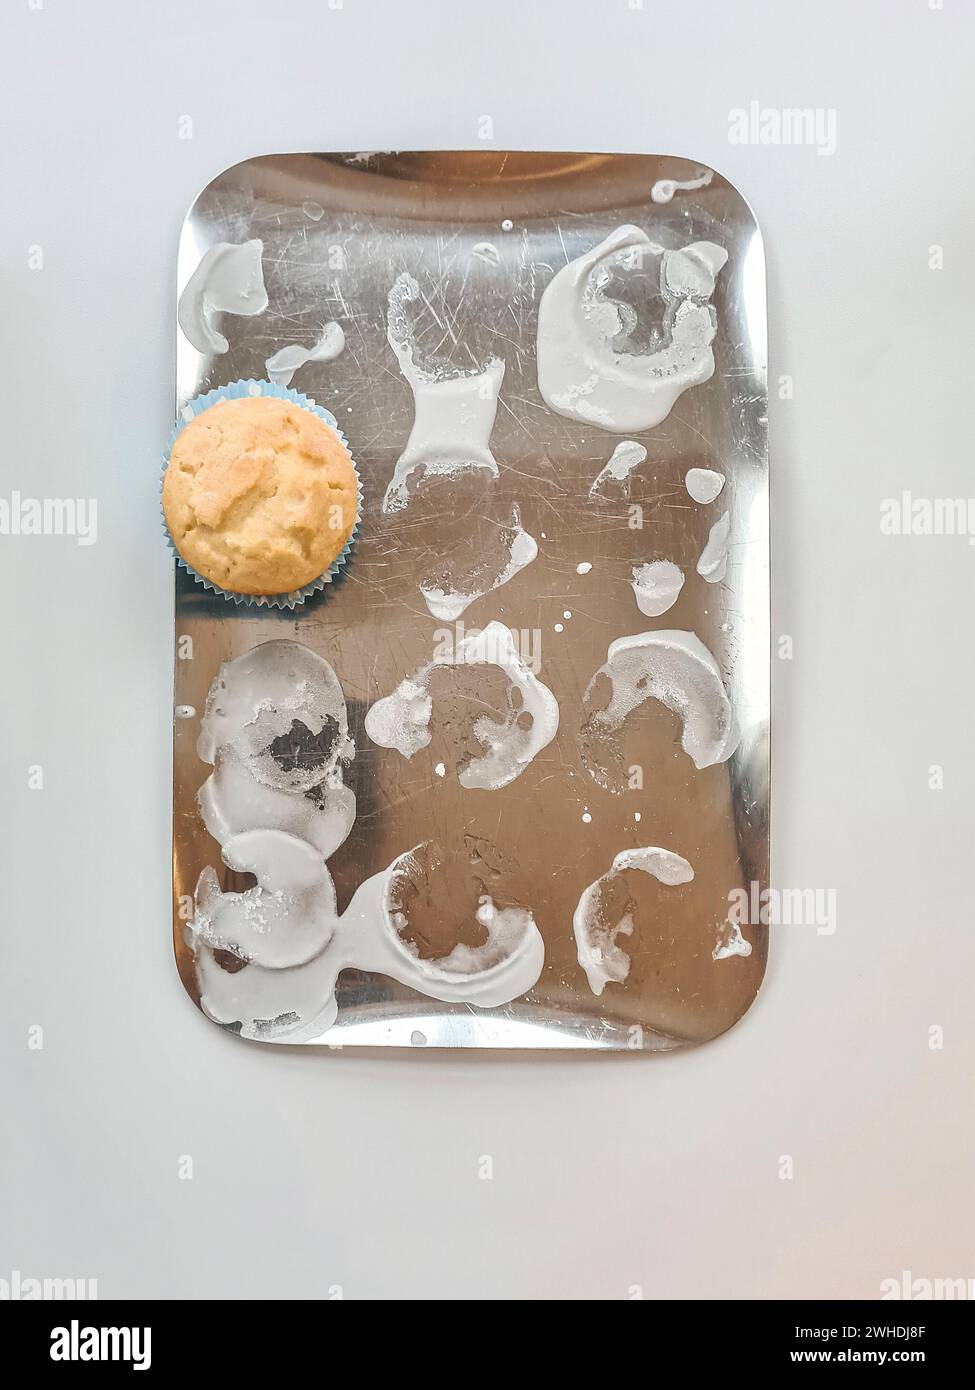 Silver tray with icing and the last cupcake left over Stock Photo